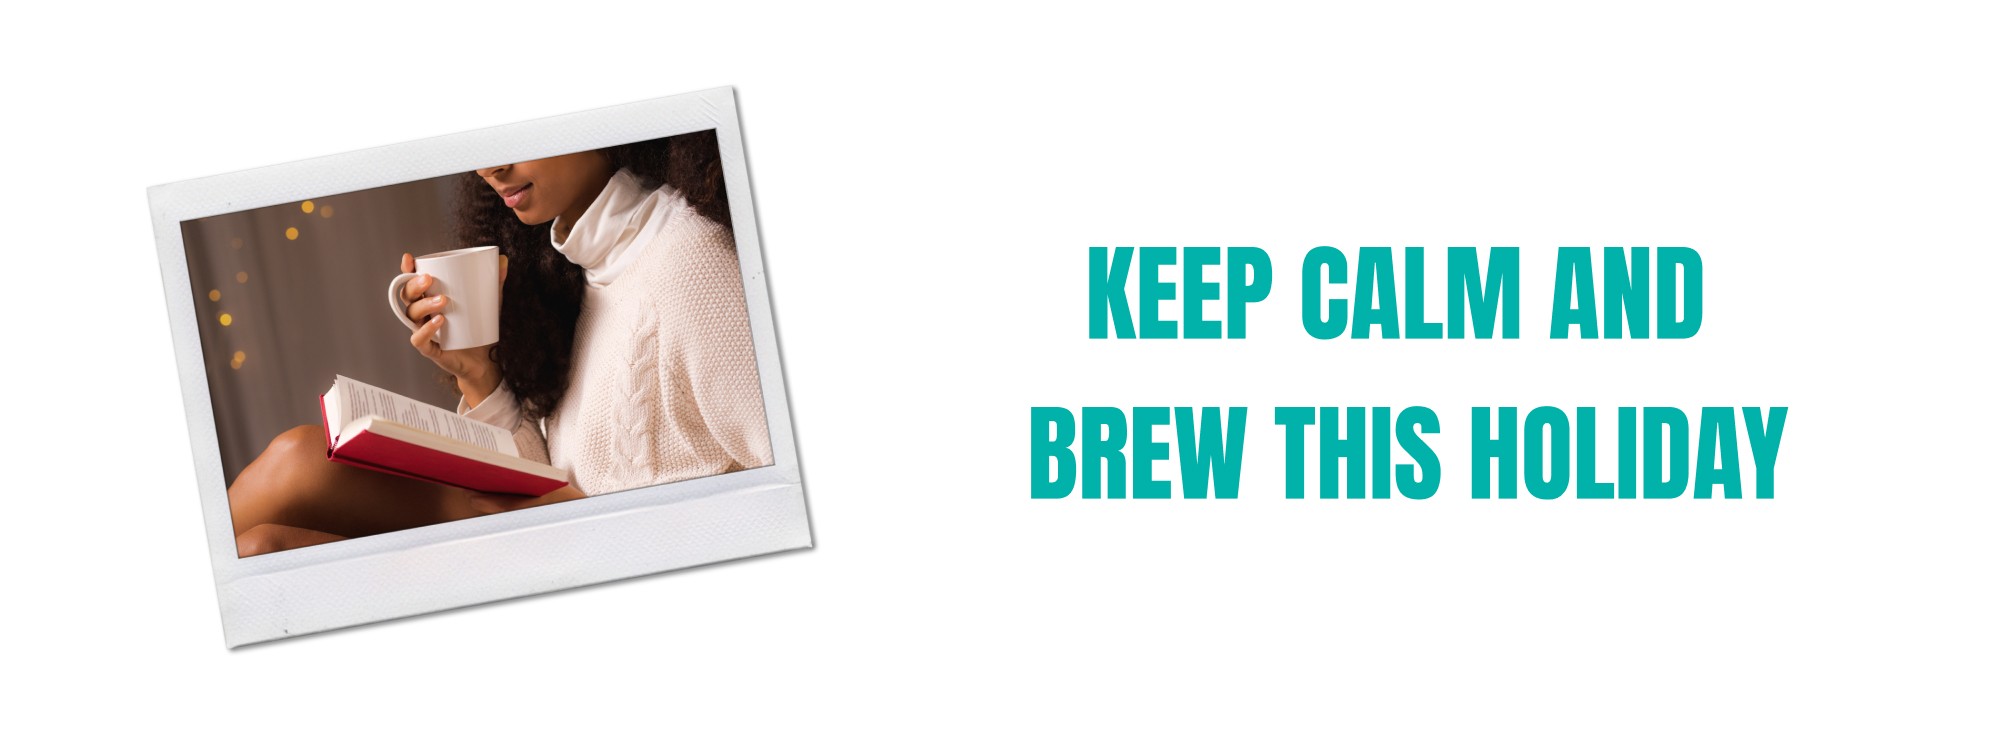 Keep Calm and Brew This Holiday 